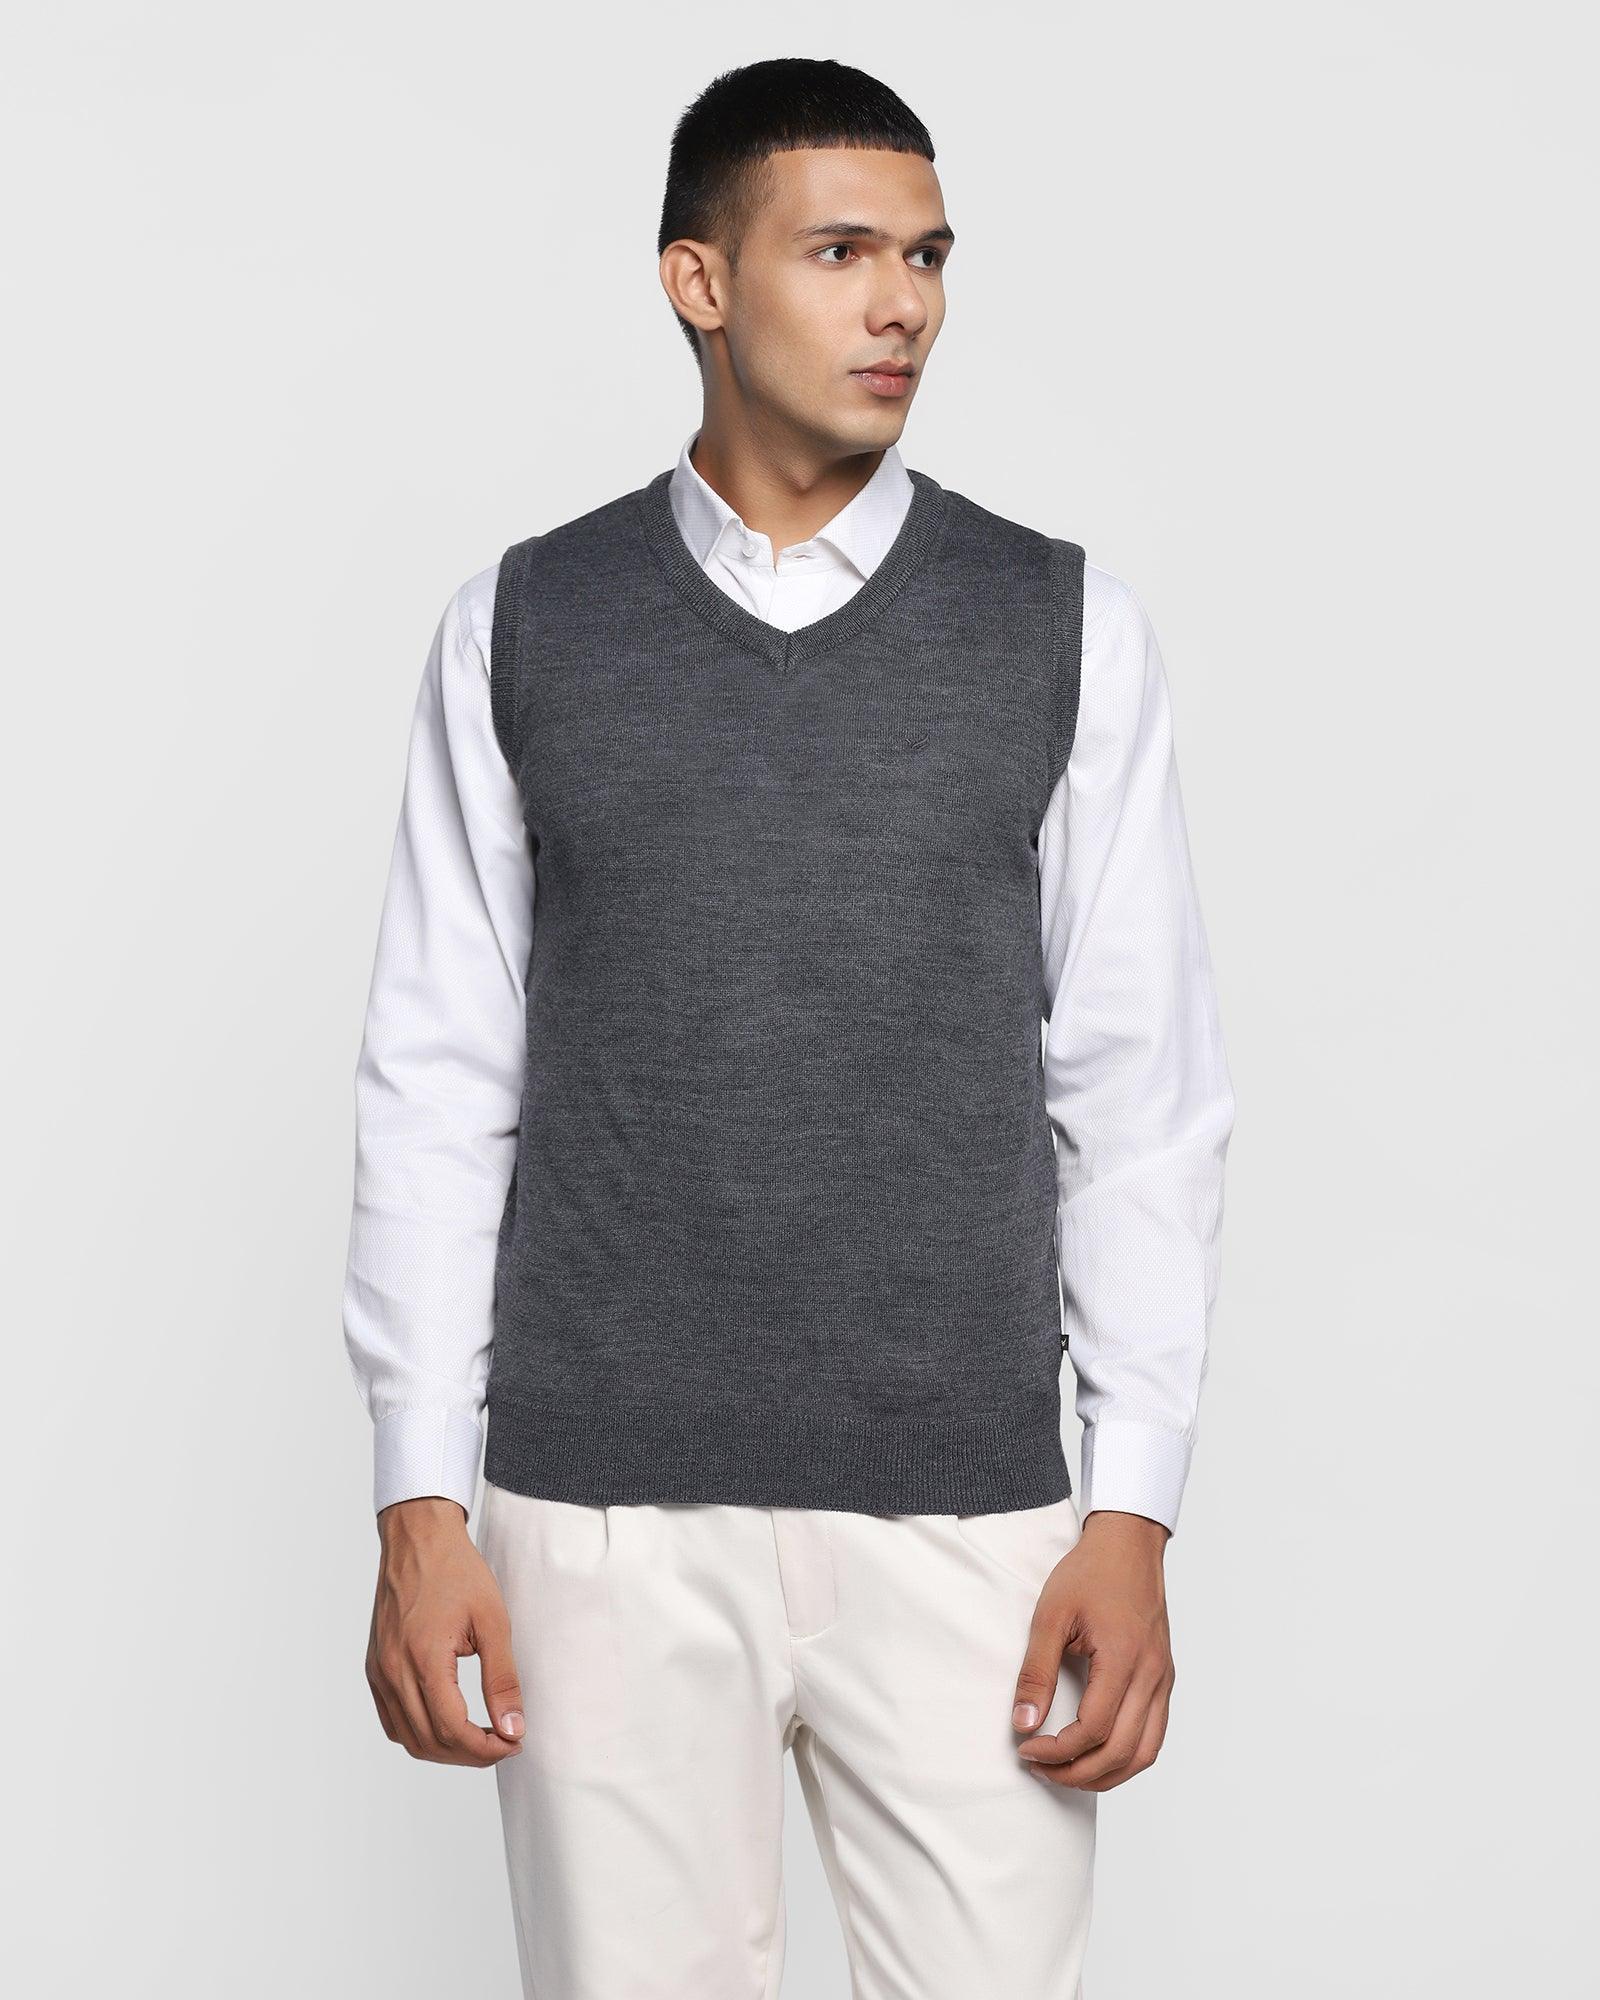 v-neck-charcoal-solid-sweater---xavior